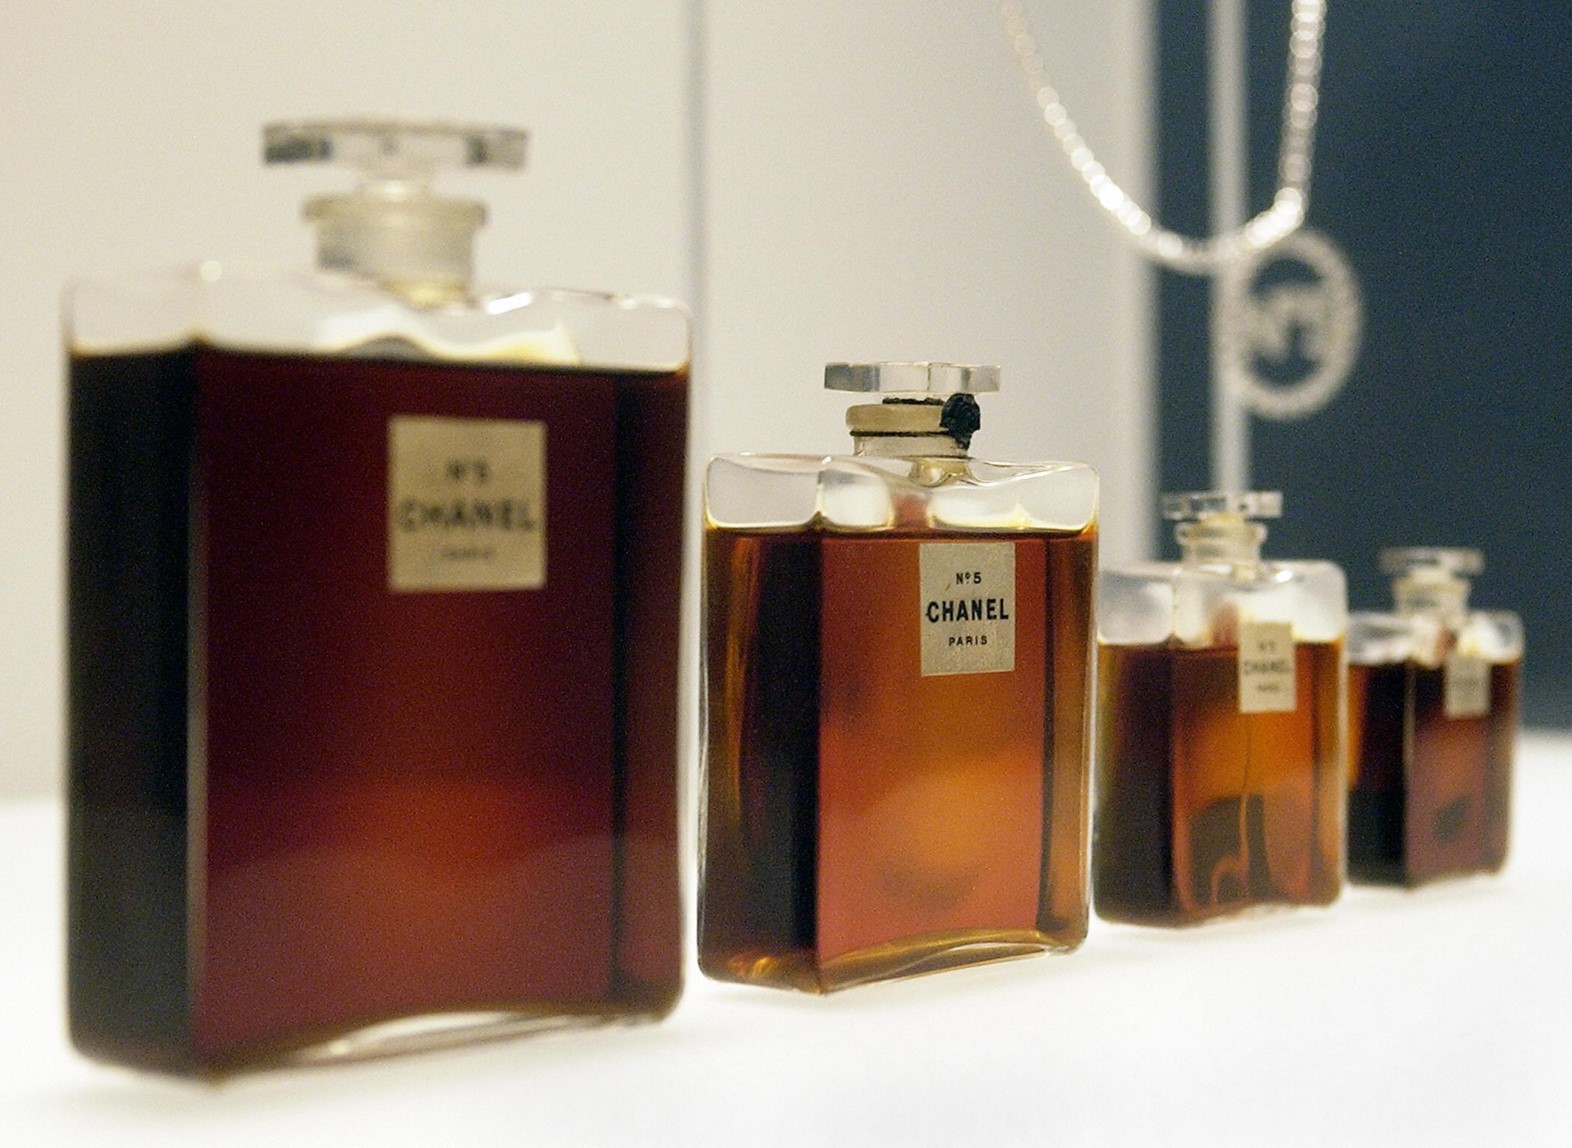 Could Chanel's new 'Gabrielle' perfume rival No.5?